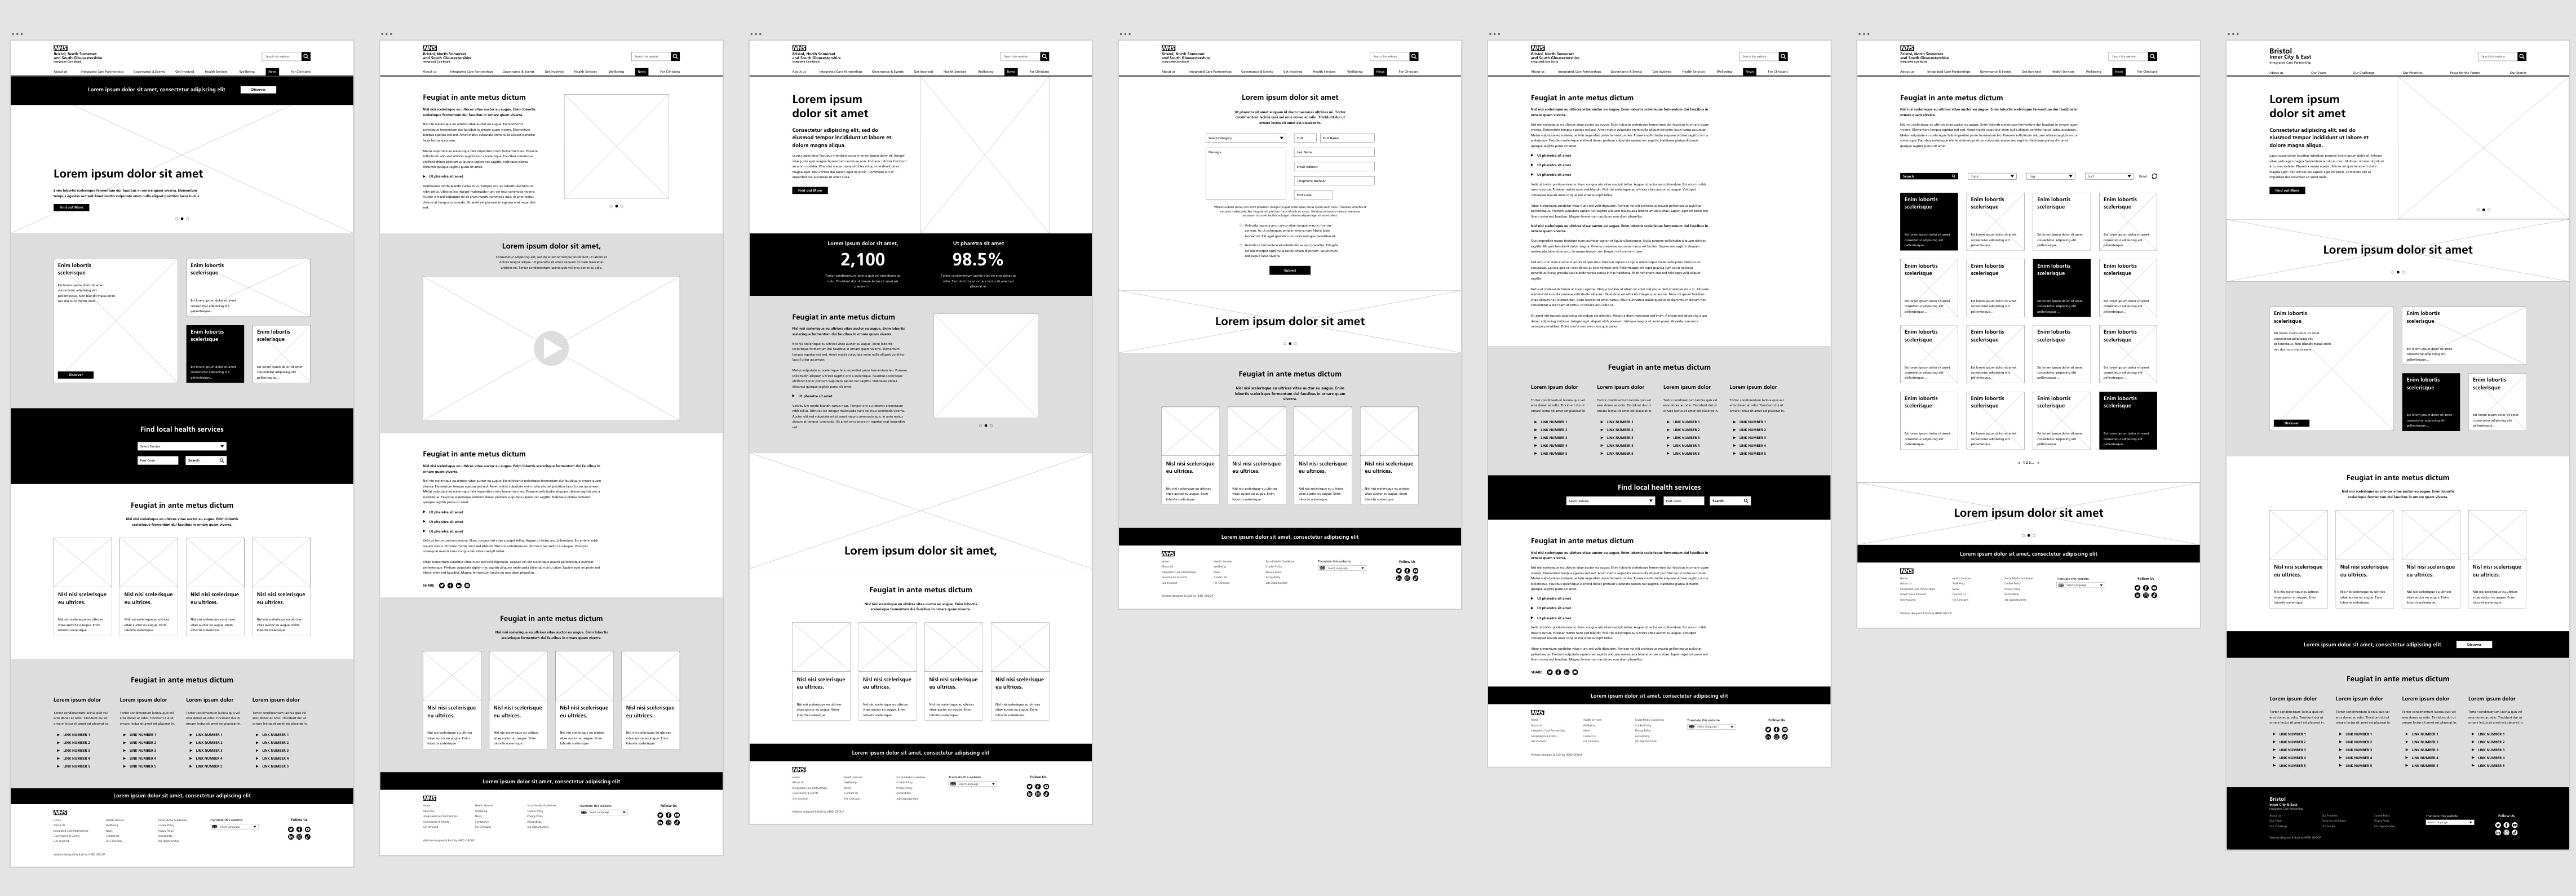 An image to show wireframes for the ICB website